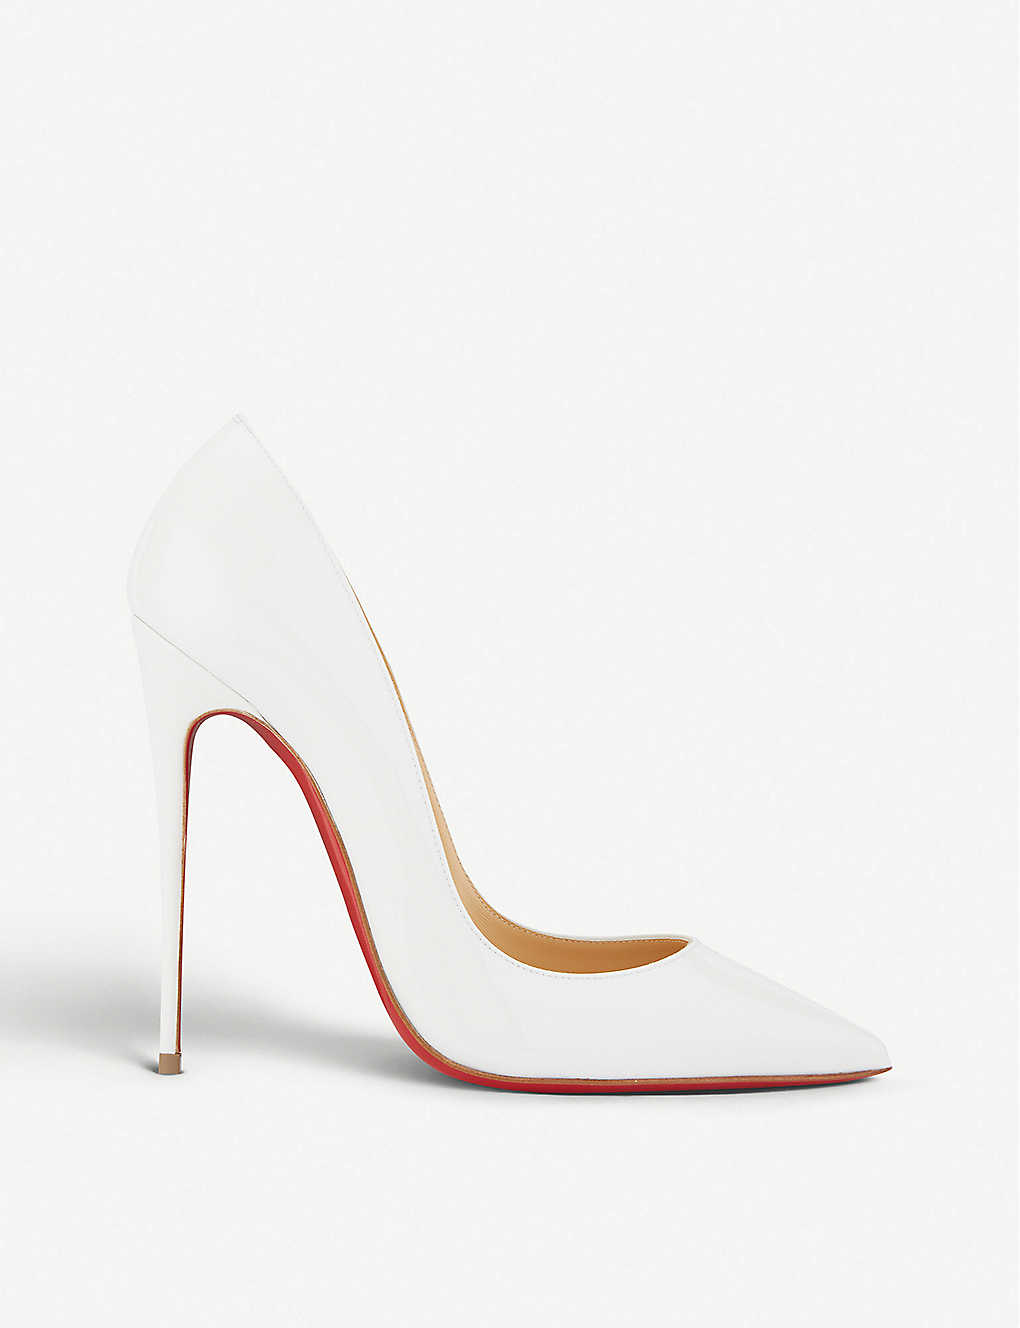 Shop Christian Louboutin Women's Bianco So Kate 120 Patent-leather Courts